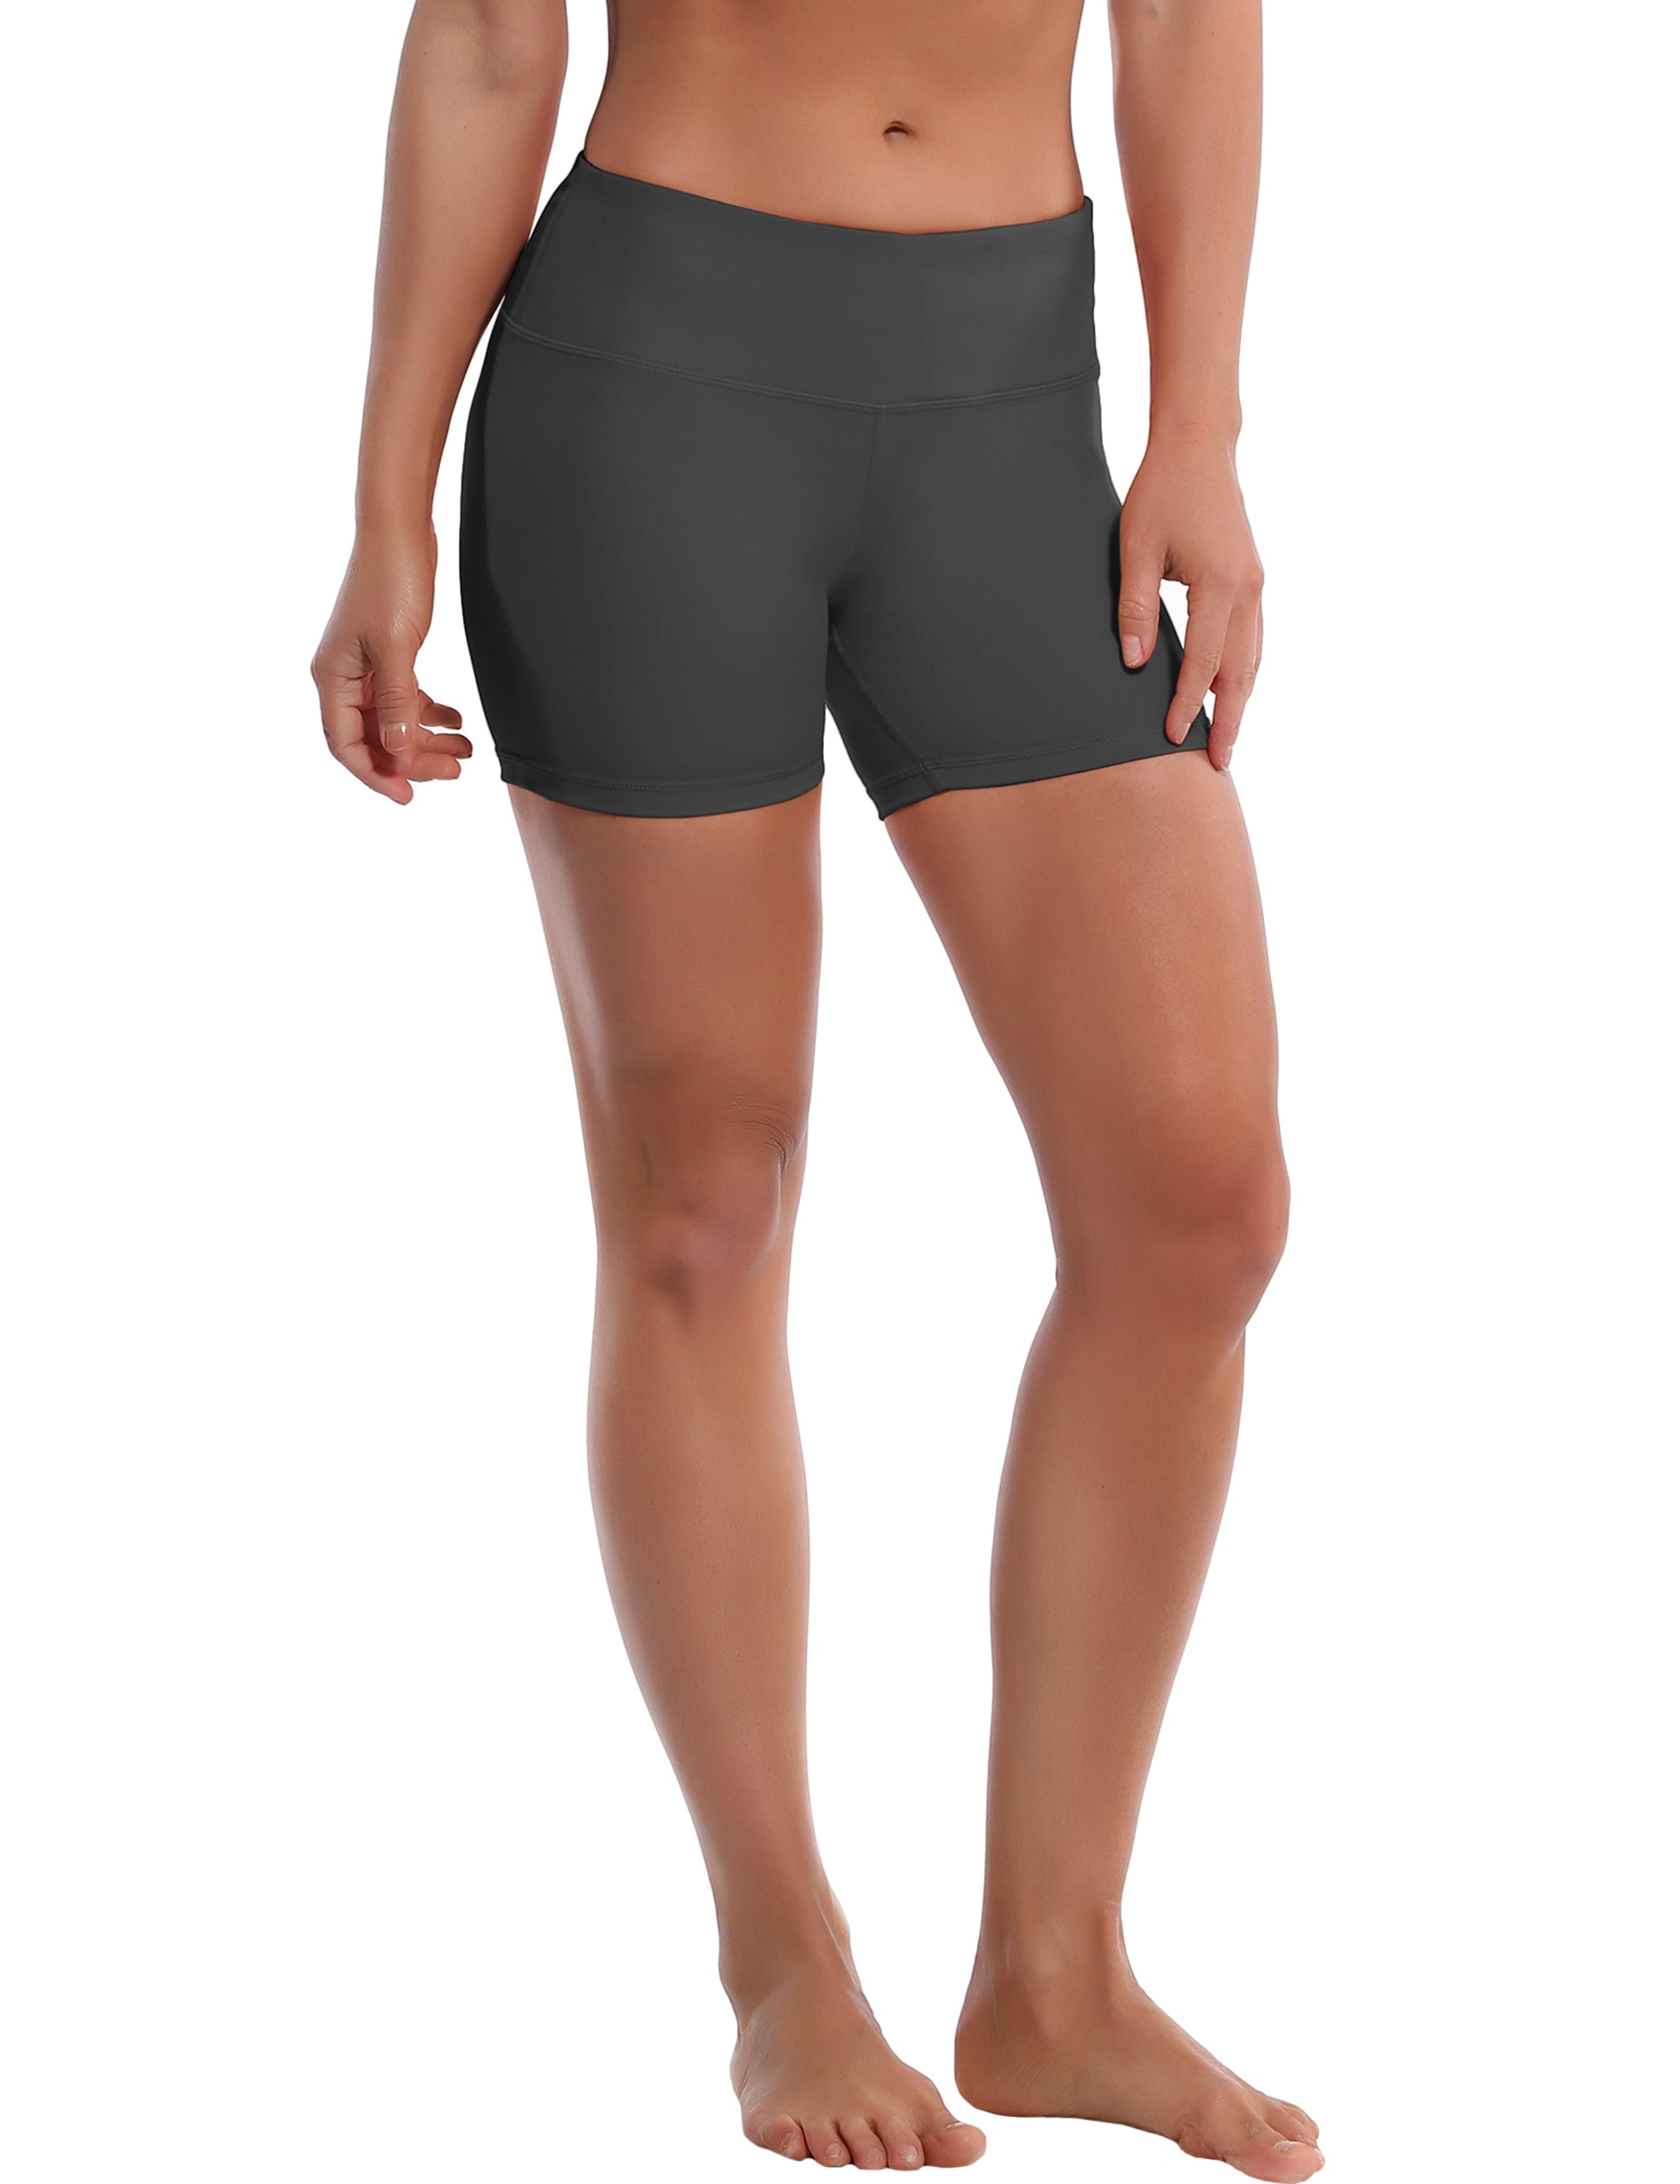 4" Pilates Shorts shadowcharcoal Sleek, soft, smooth and totally comfortable: our newest style is here. Softest-ever fabric High elasticity High density 4-way stretch Fabric doesn't attract lint easily No see-through Moisture-wicking Machine wash 75% Nylon, 25% Spandex